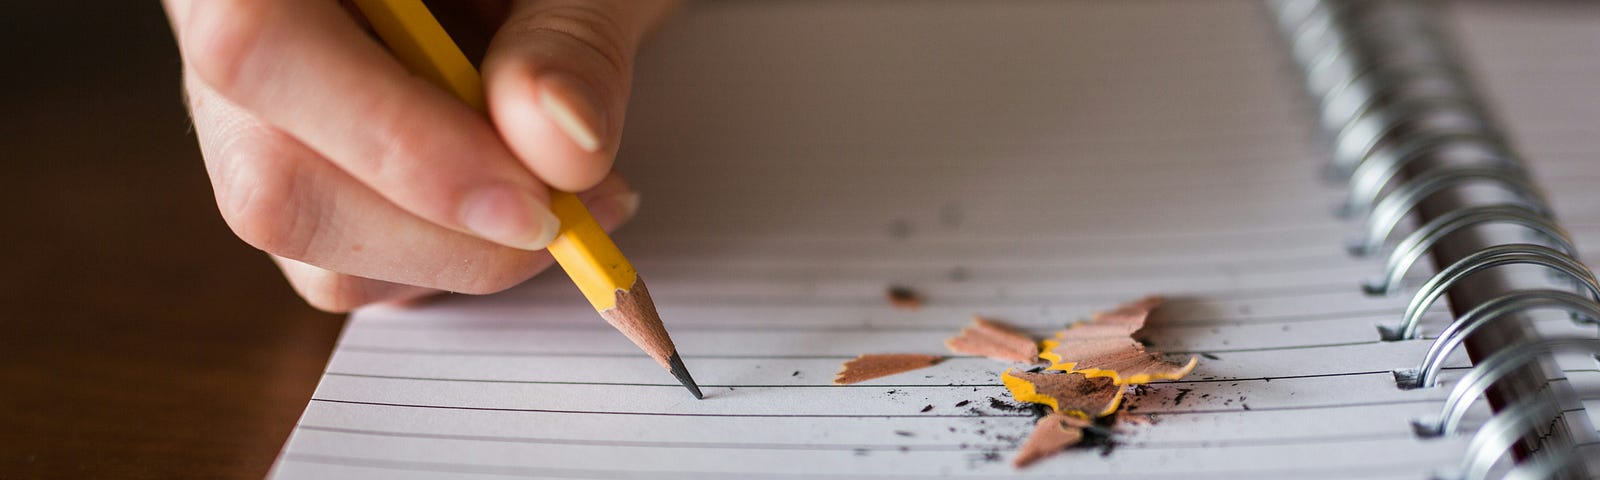 A hand writing in a note book with a yellow pencil.